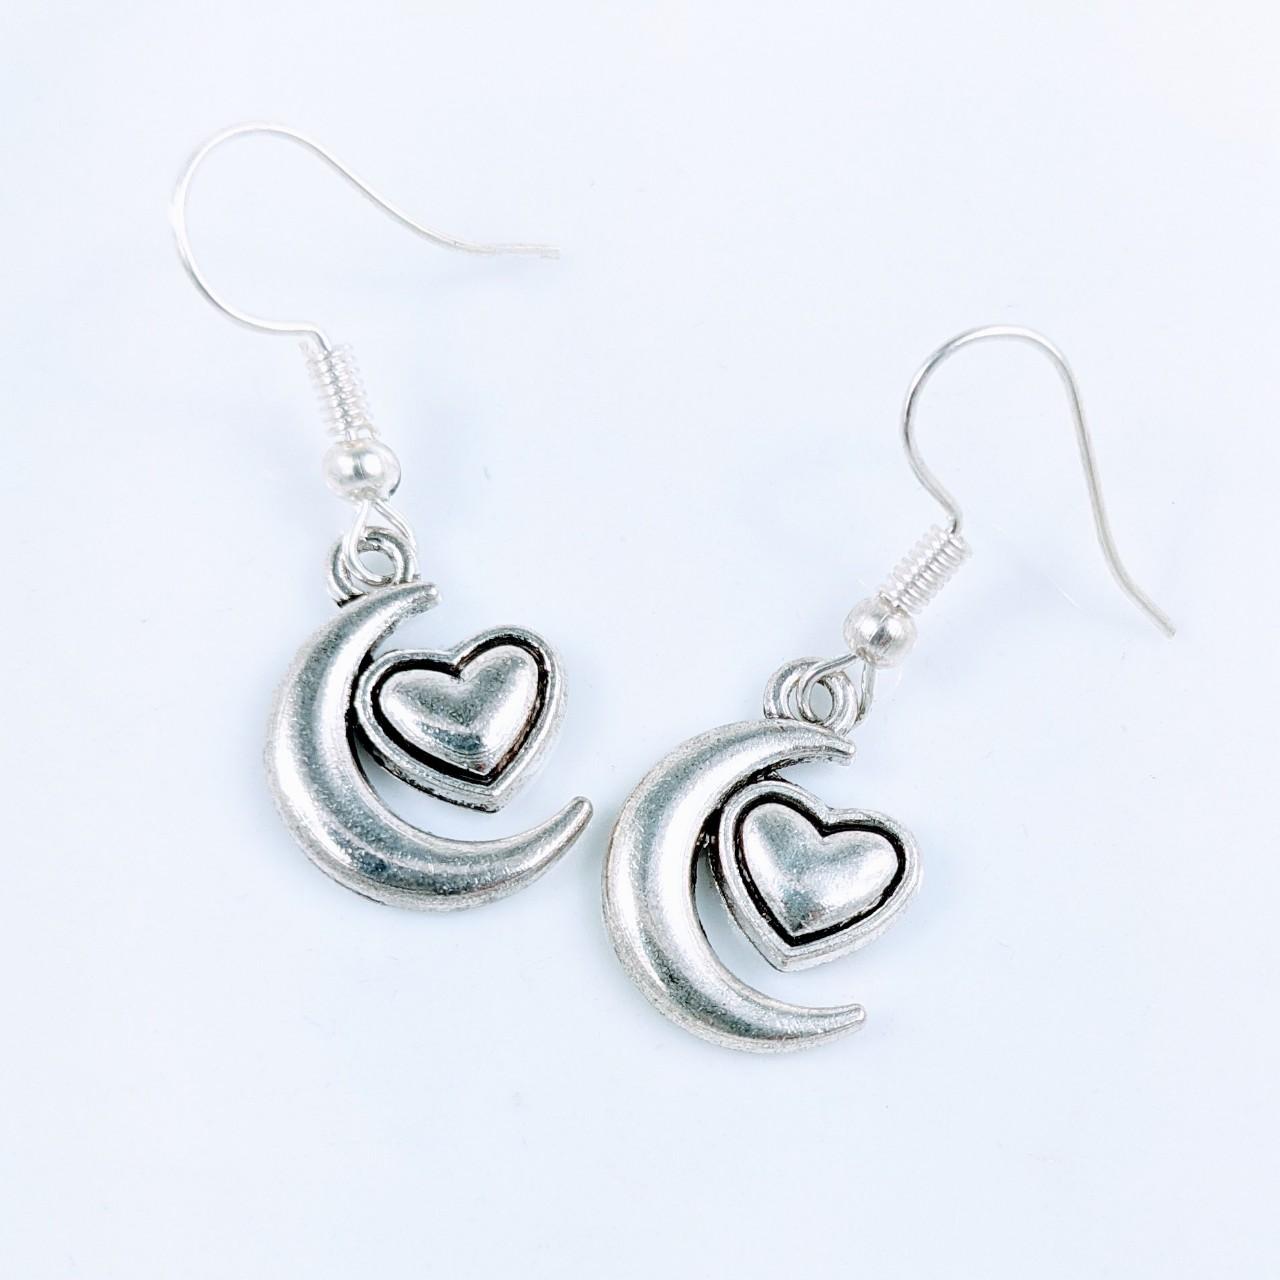 Product Image 1 - Moon Heart Earrings
Brand new. 

Made